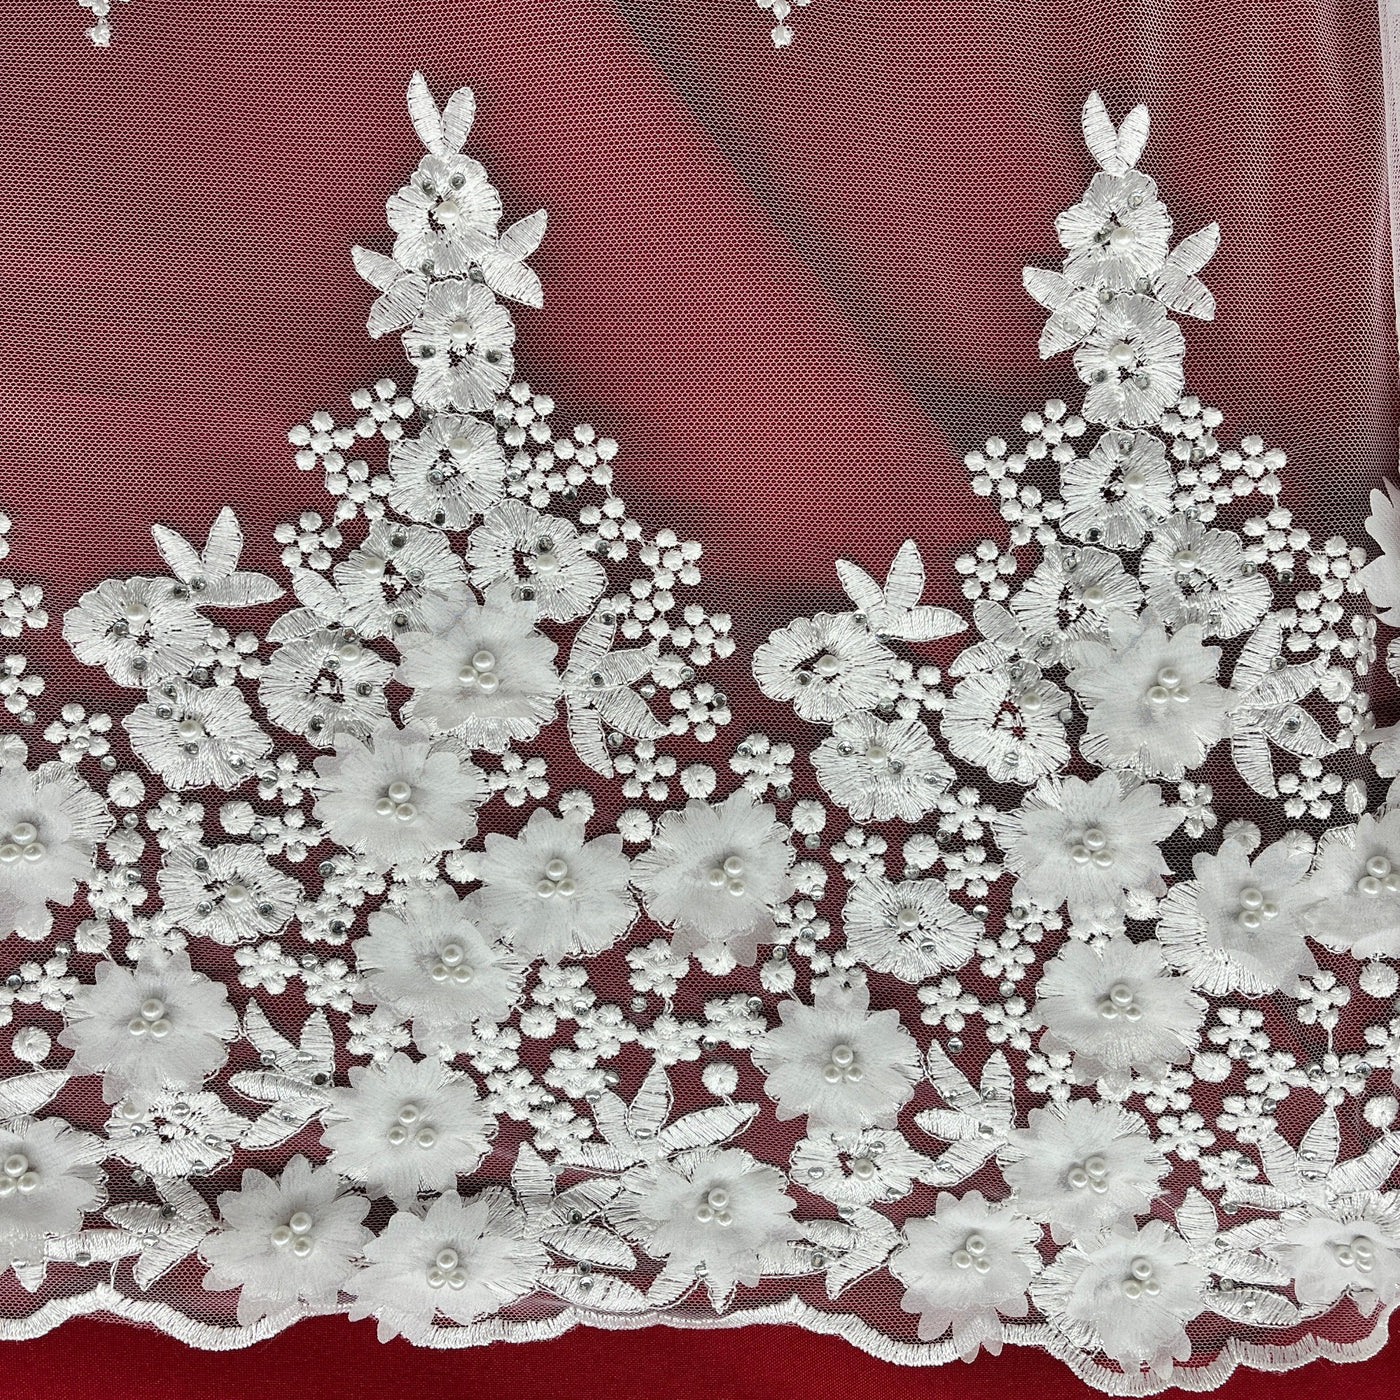 Beaded 3D Floral Lace Fabric Embroidered on 100% Polyester Net Mesh | Lace USA - GD-176